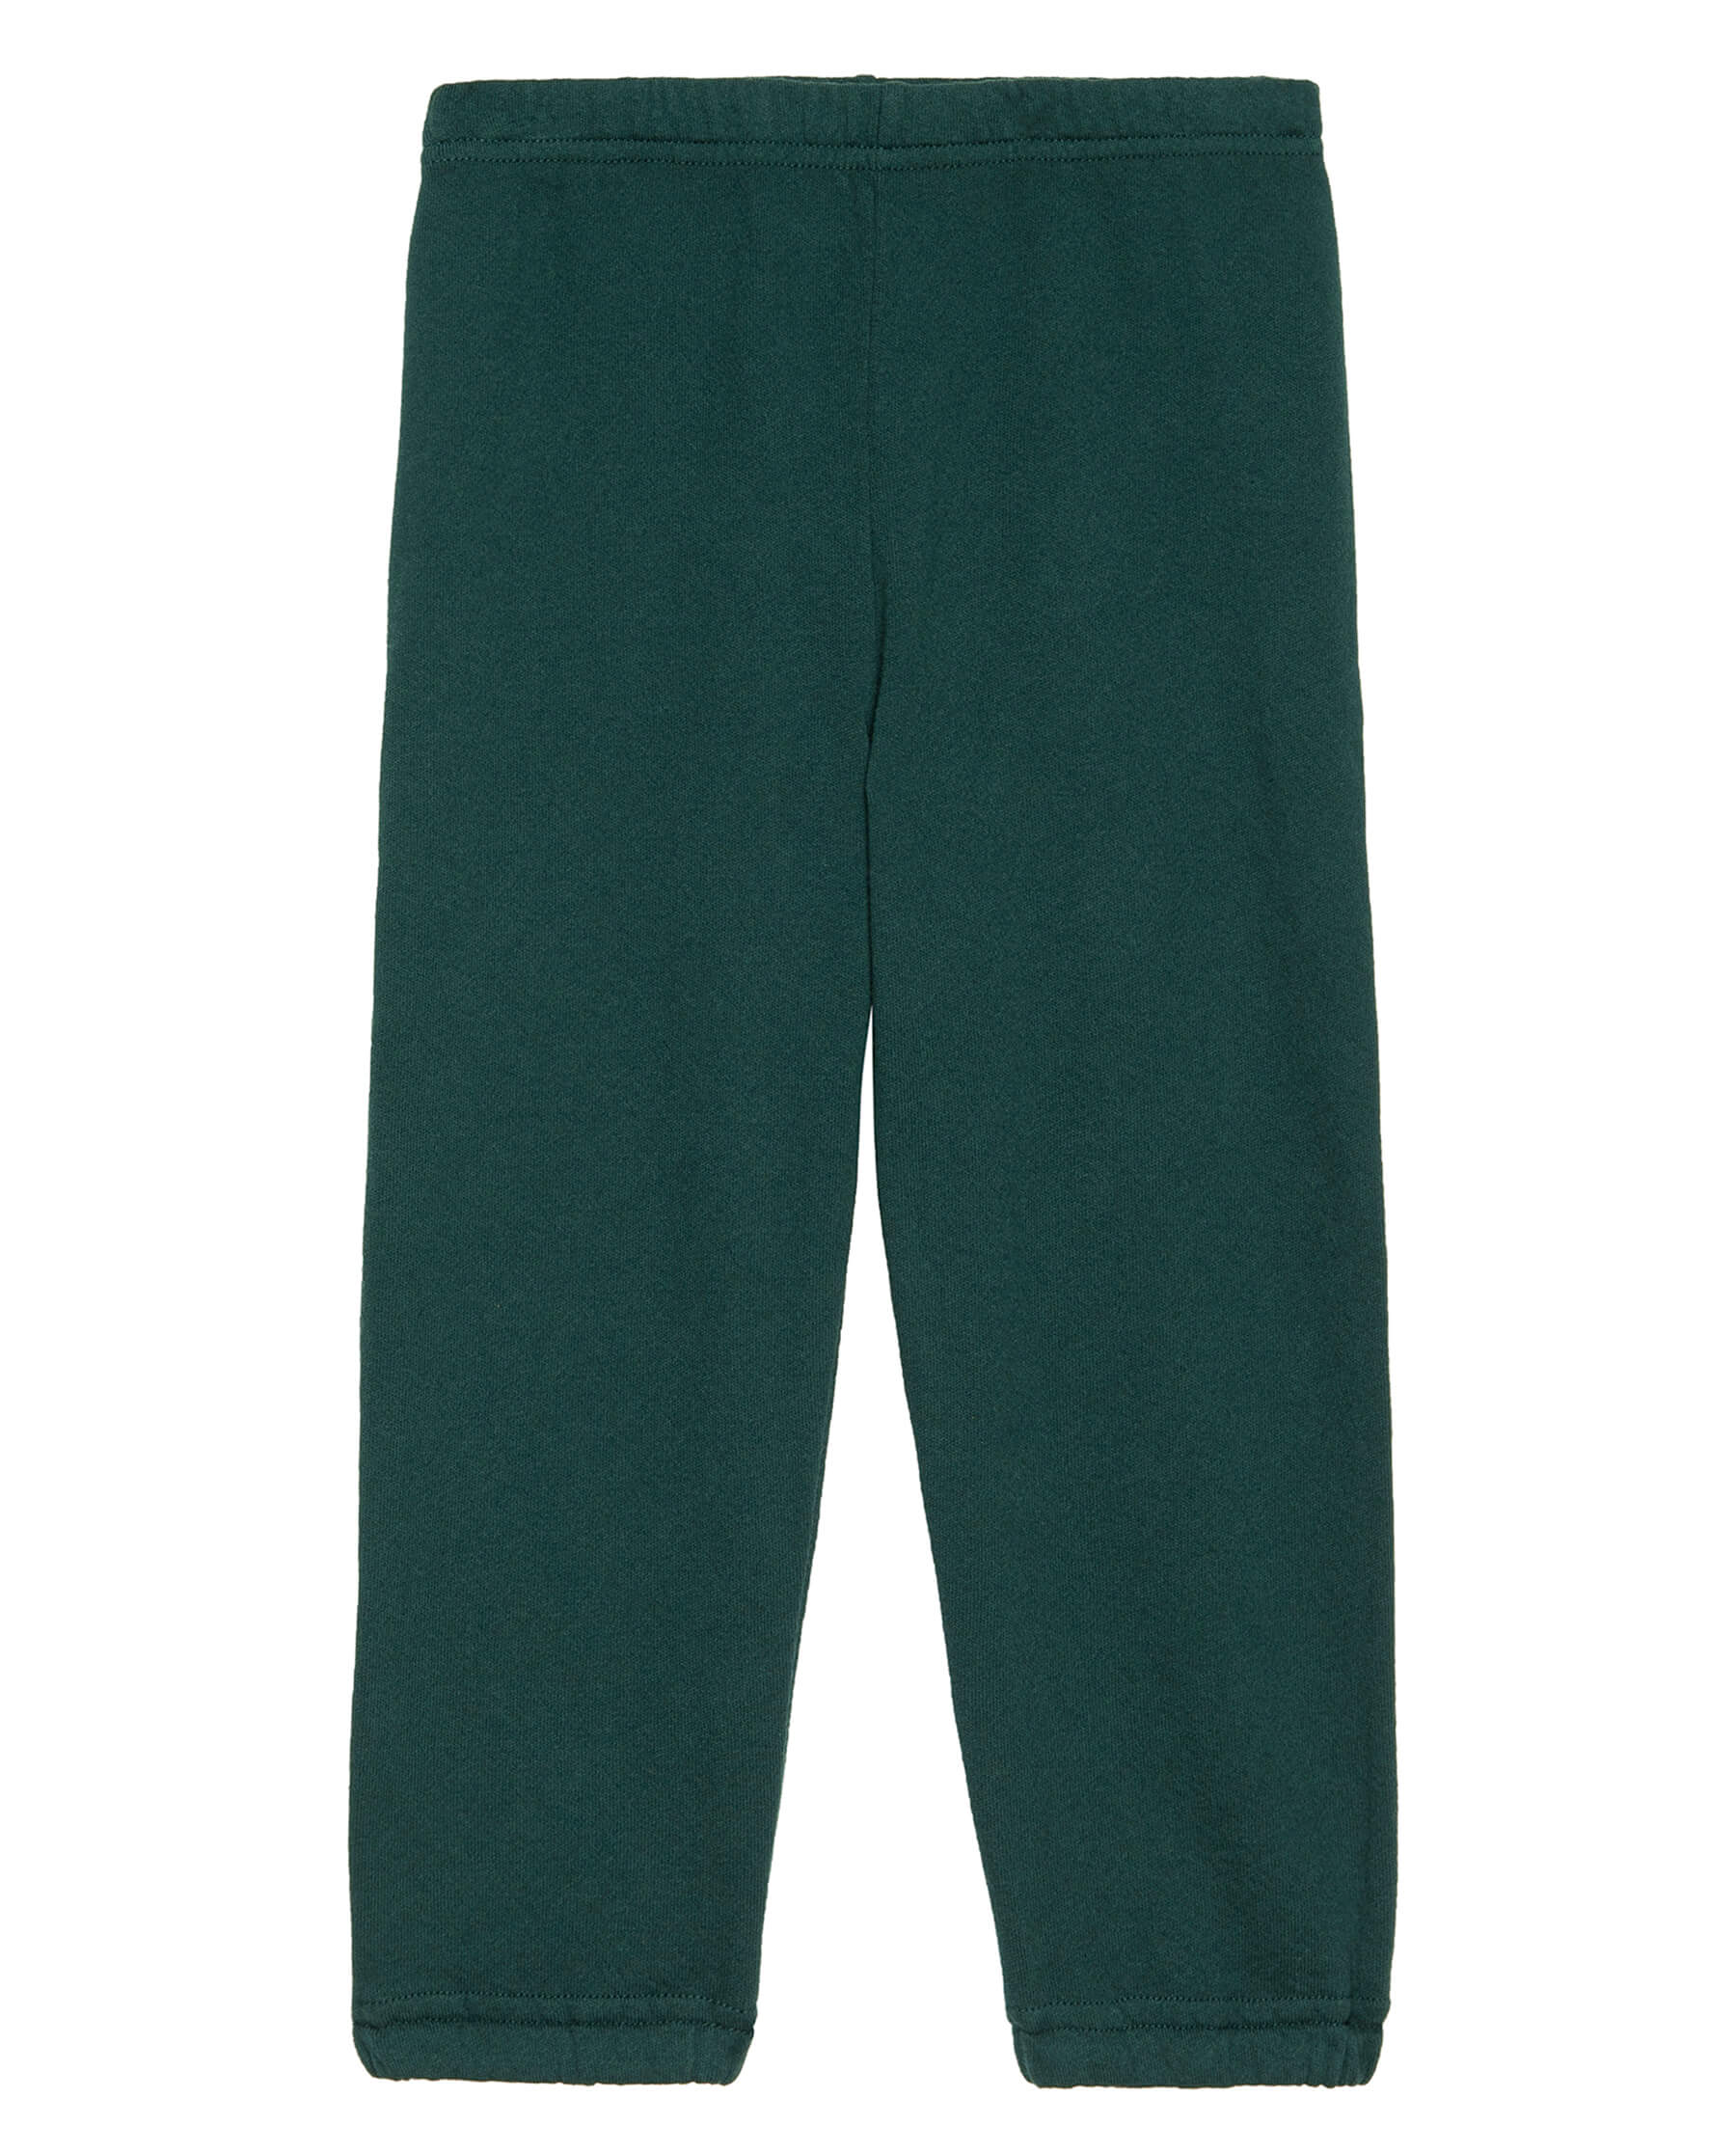 The Little Stadium Sweatpant. Solid -- Green Grove SWEATPANTS THE GREAT. FALL 23 LITTLE